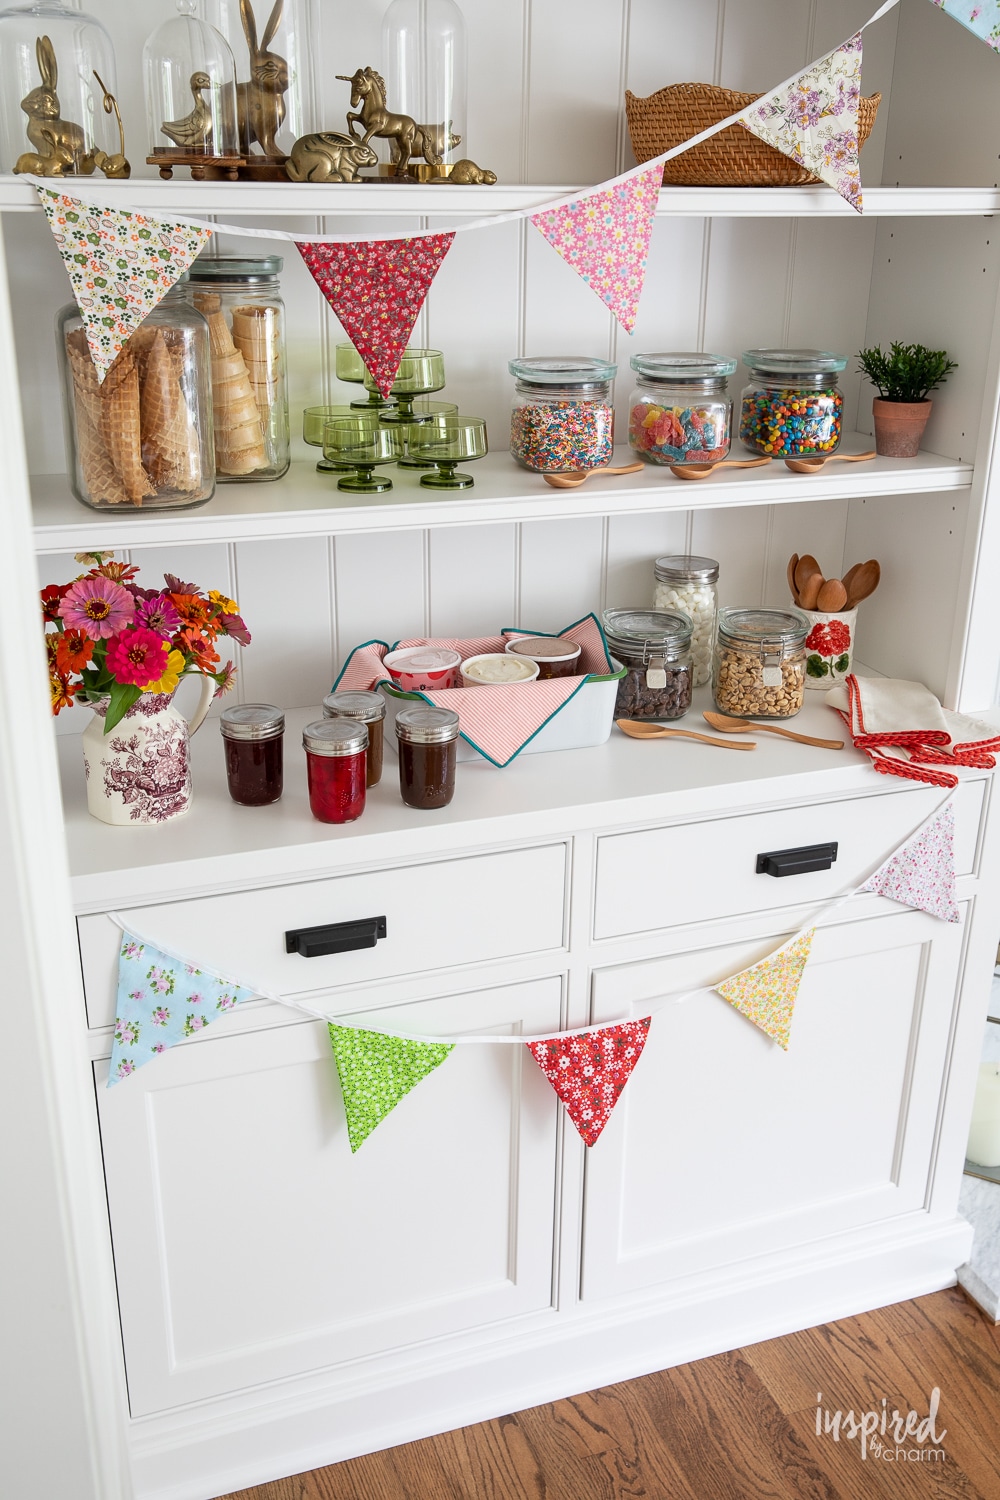 colorful ice cream sundae bar with toppings and cones in glass jars and a colorful pendant garland.